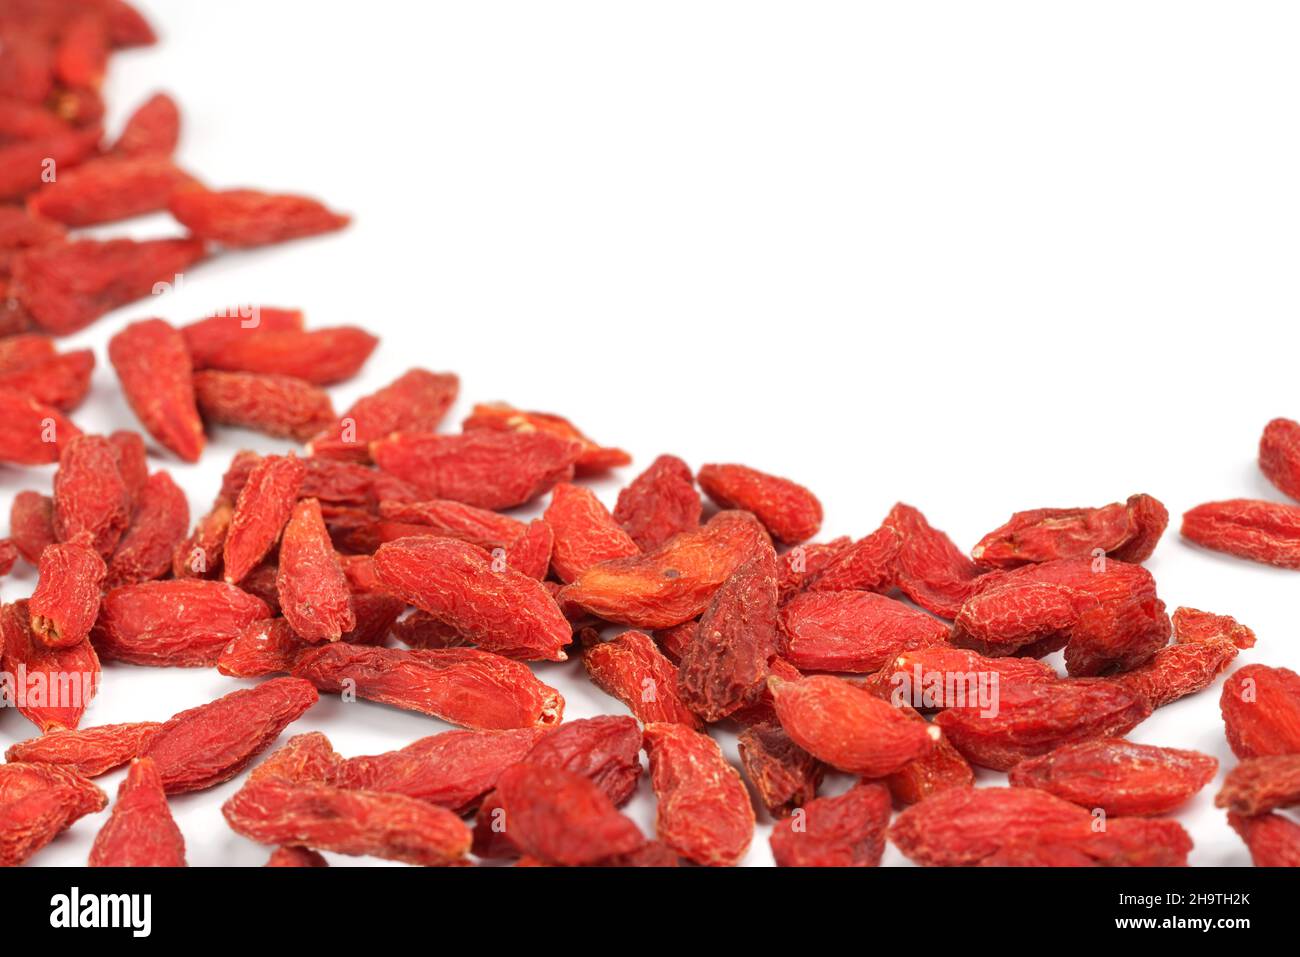 Closeup photo of goji berry (wolfberry - Lycium chinense) dried fruits isolated on white background space for text upper right corner Stock Photo